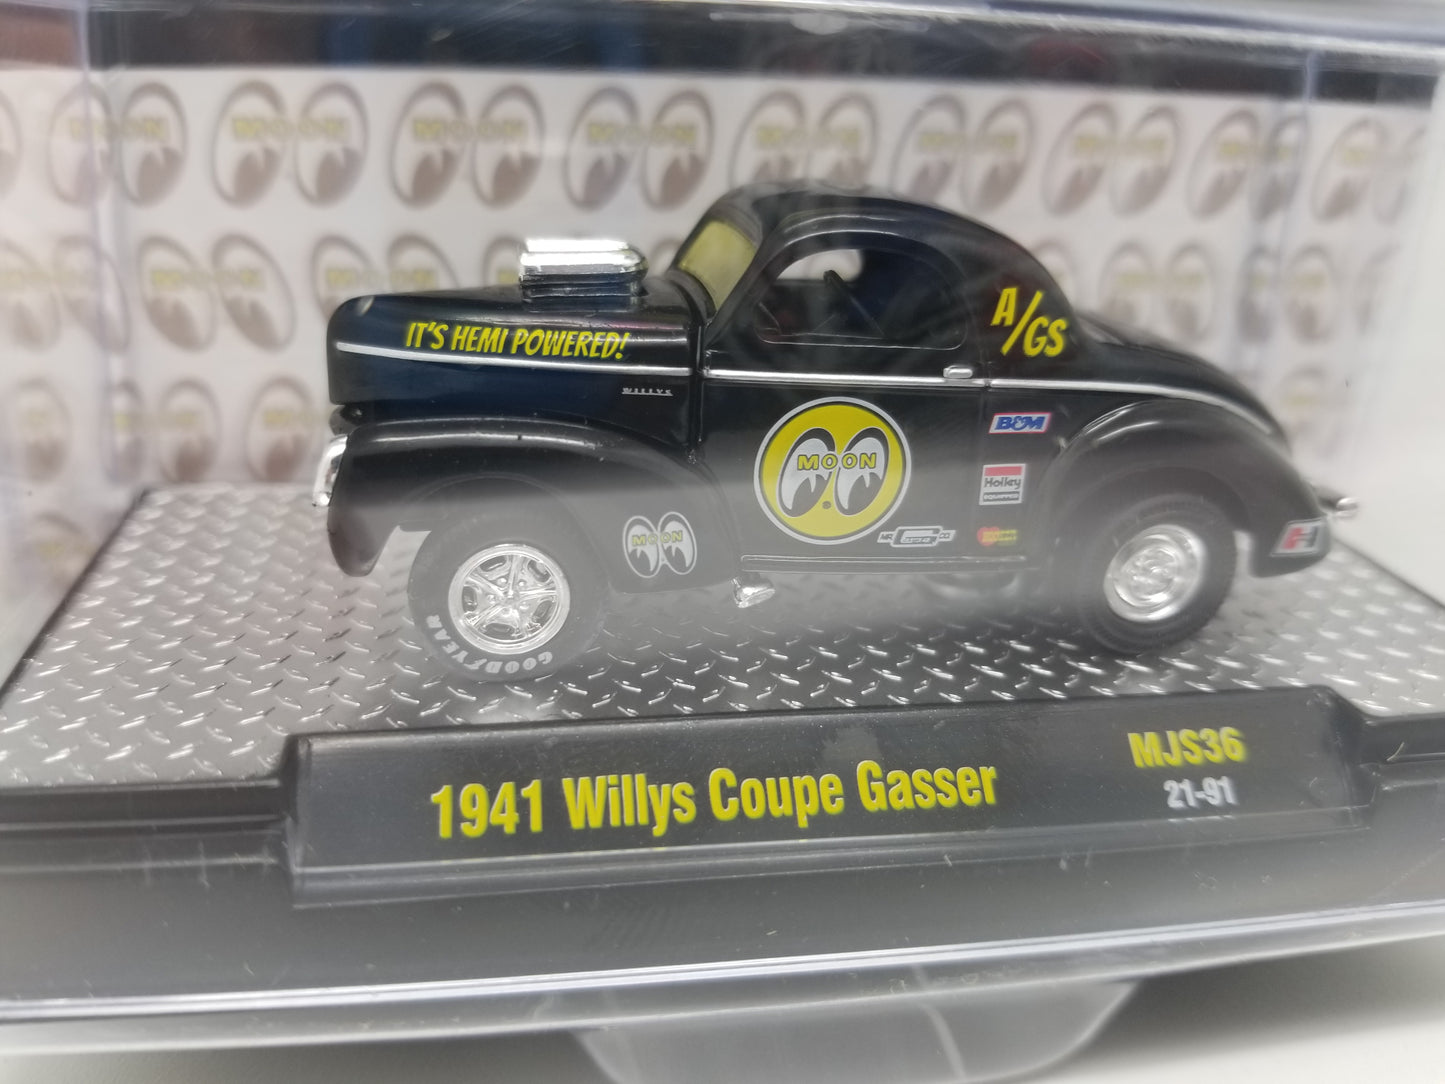 M2 1941 Willys Coupe Gasser - Moon - MiJo Exclusive